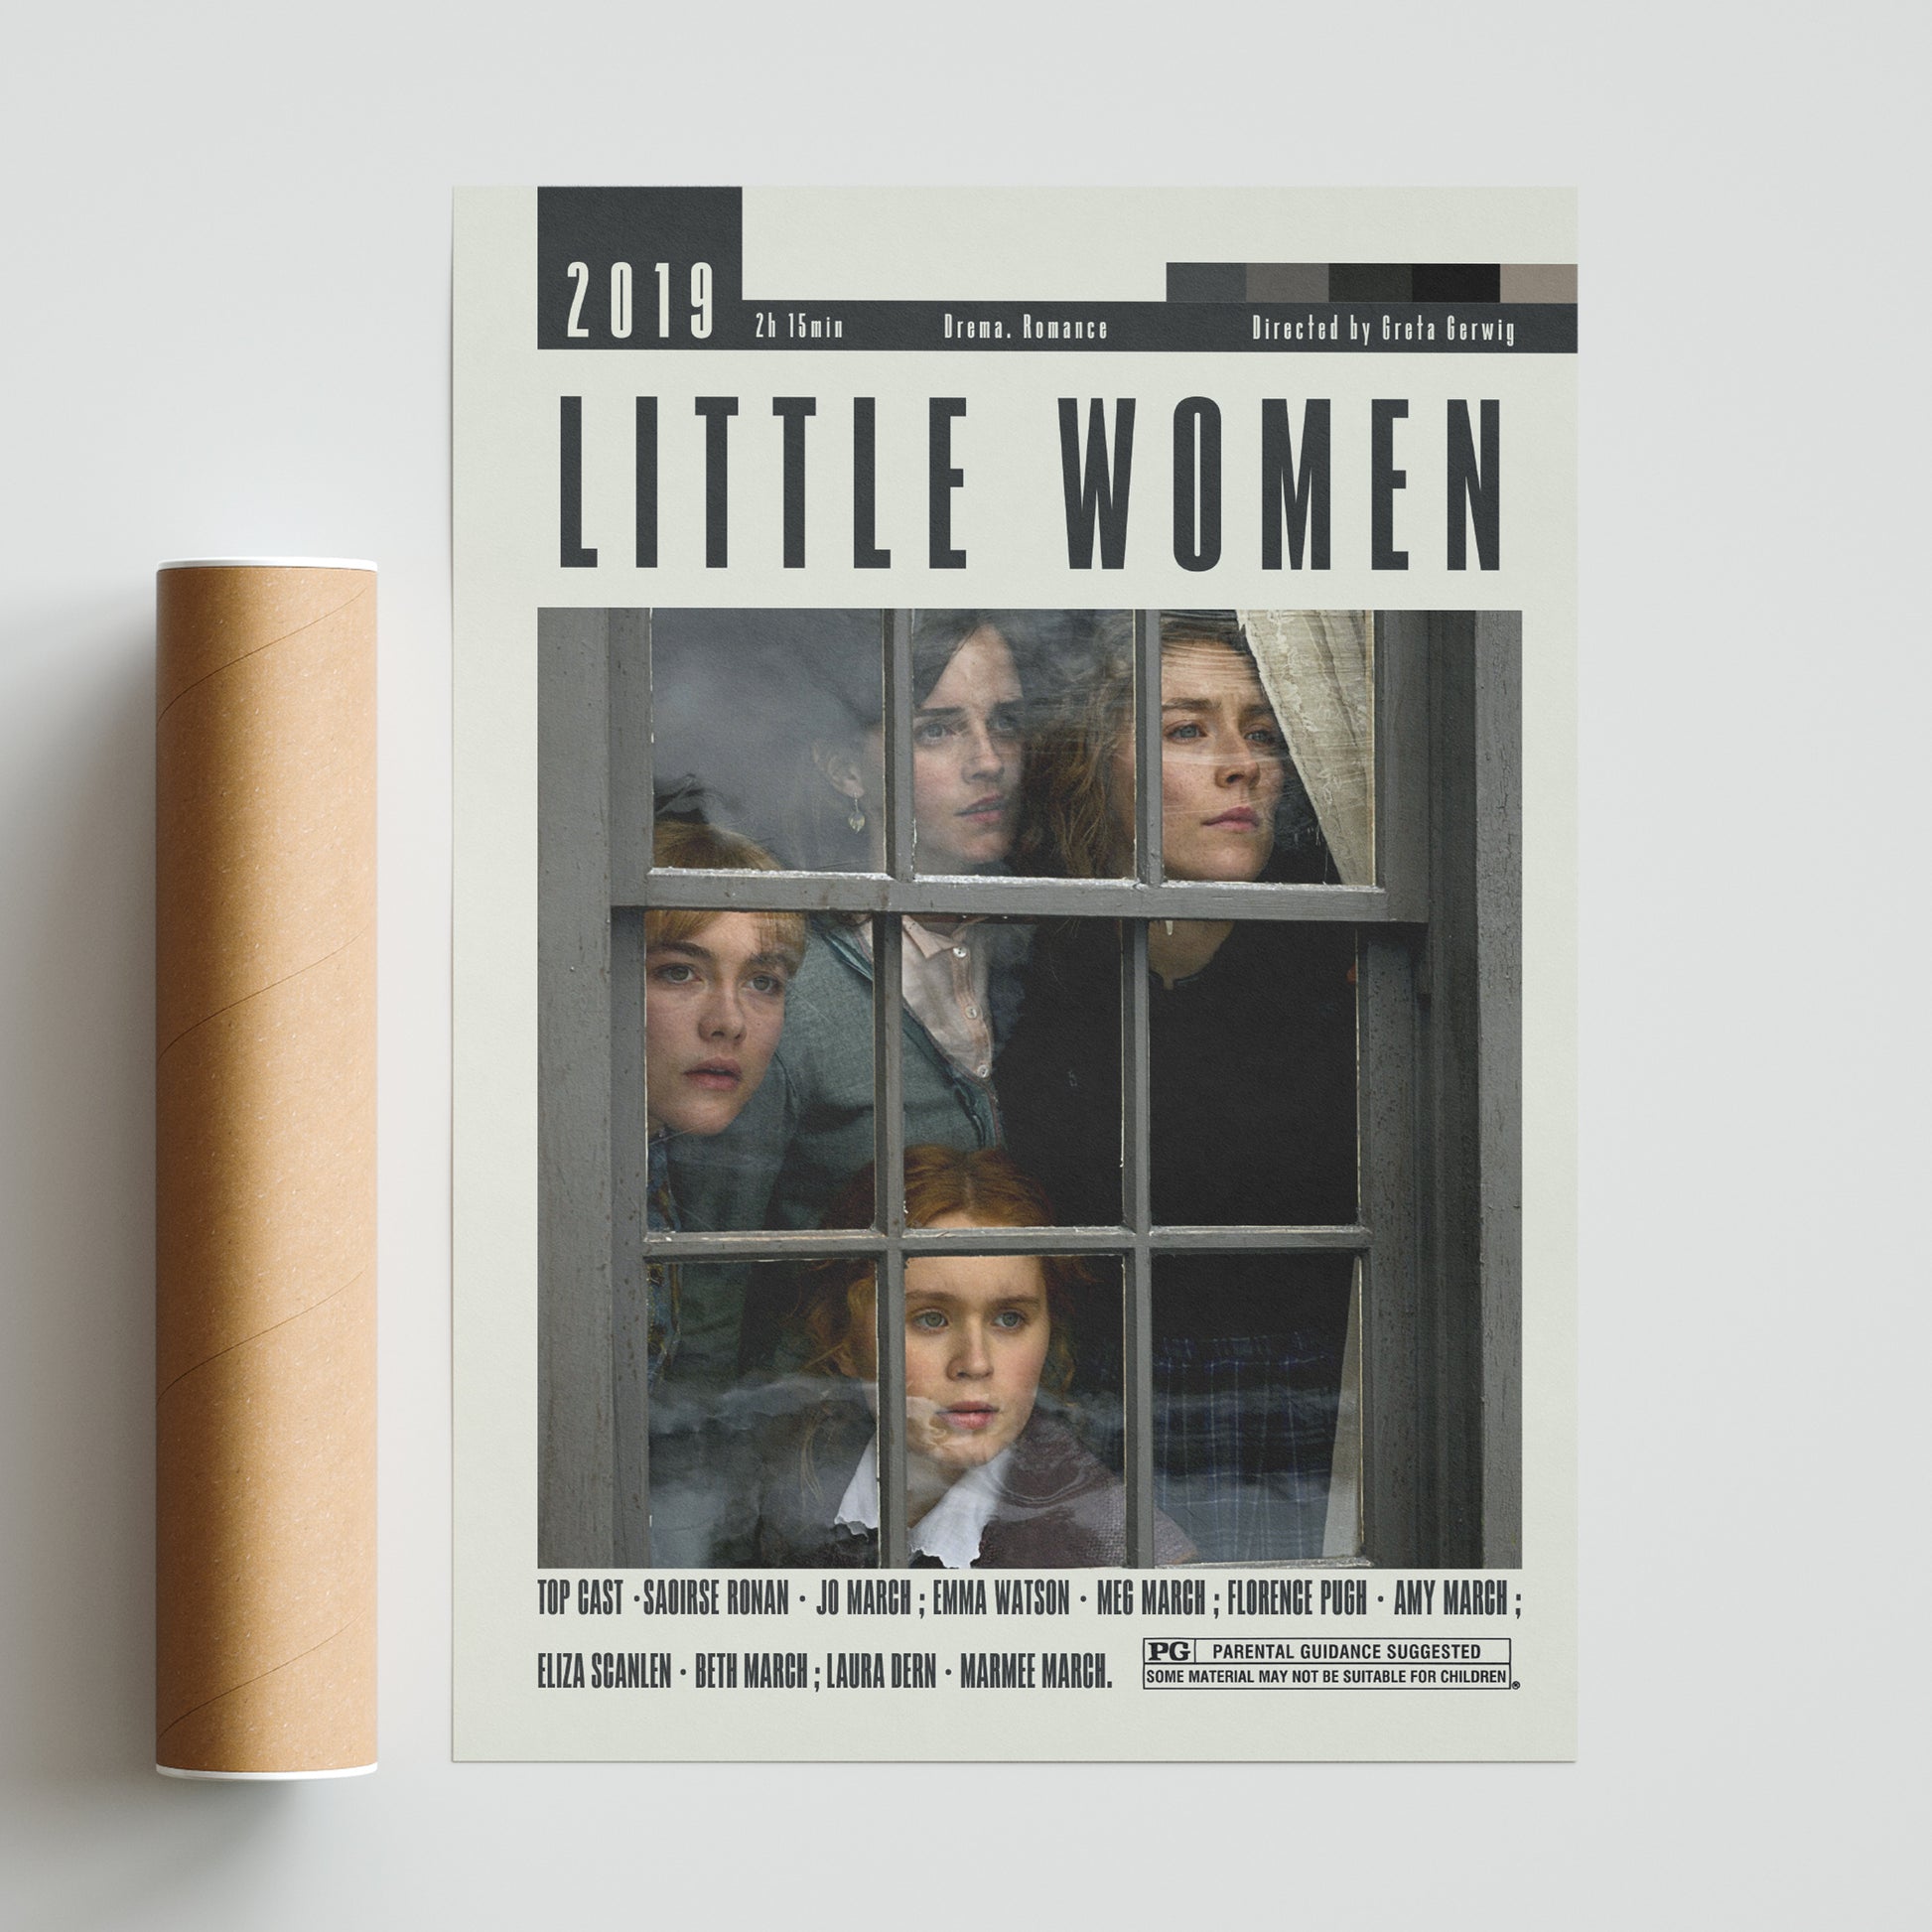 Enhance your home decor with our custom, minimalist movie poster featuring Greta Gerwig's Little Women. Available in various sizes from A6 to A3, this vintage retro art print is a must-have for any movie lover. Perfect for collectors of original movie posters, this print captures the essence of the film in a sleek and stylish design. Bring the best movies of all time into your home with this stunning wall art decor.